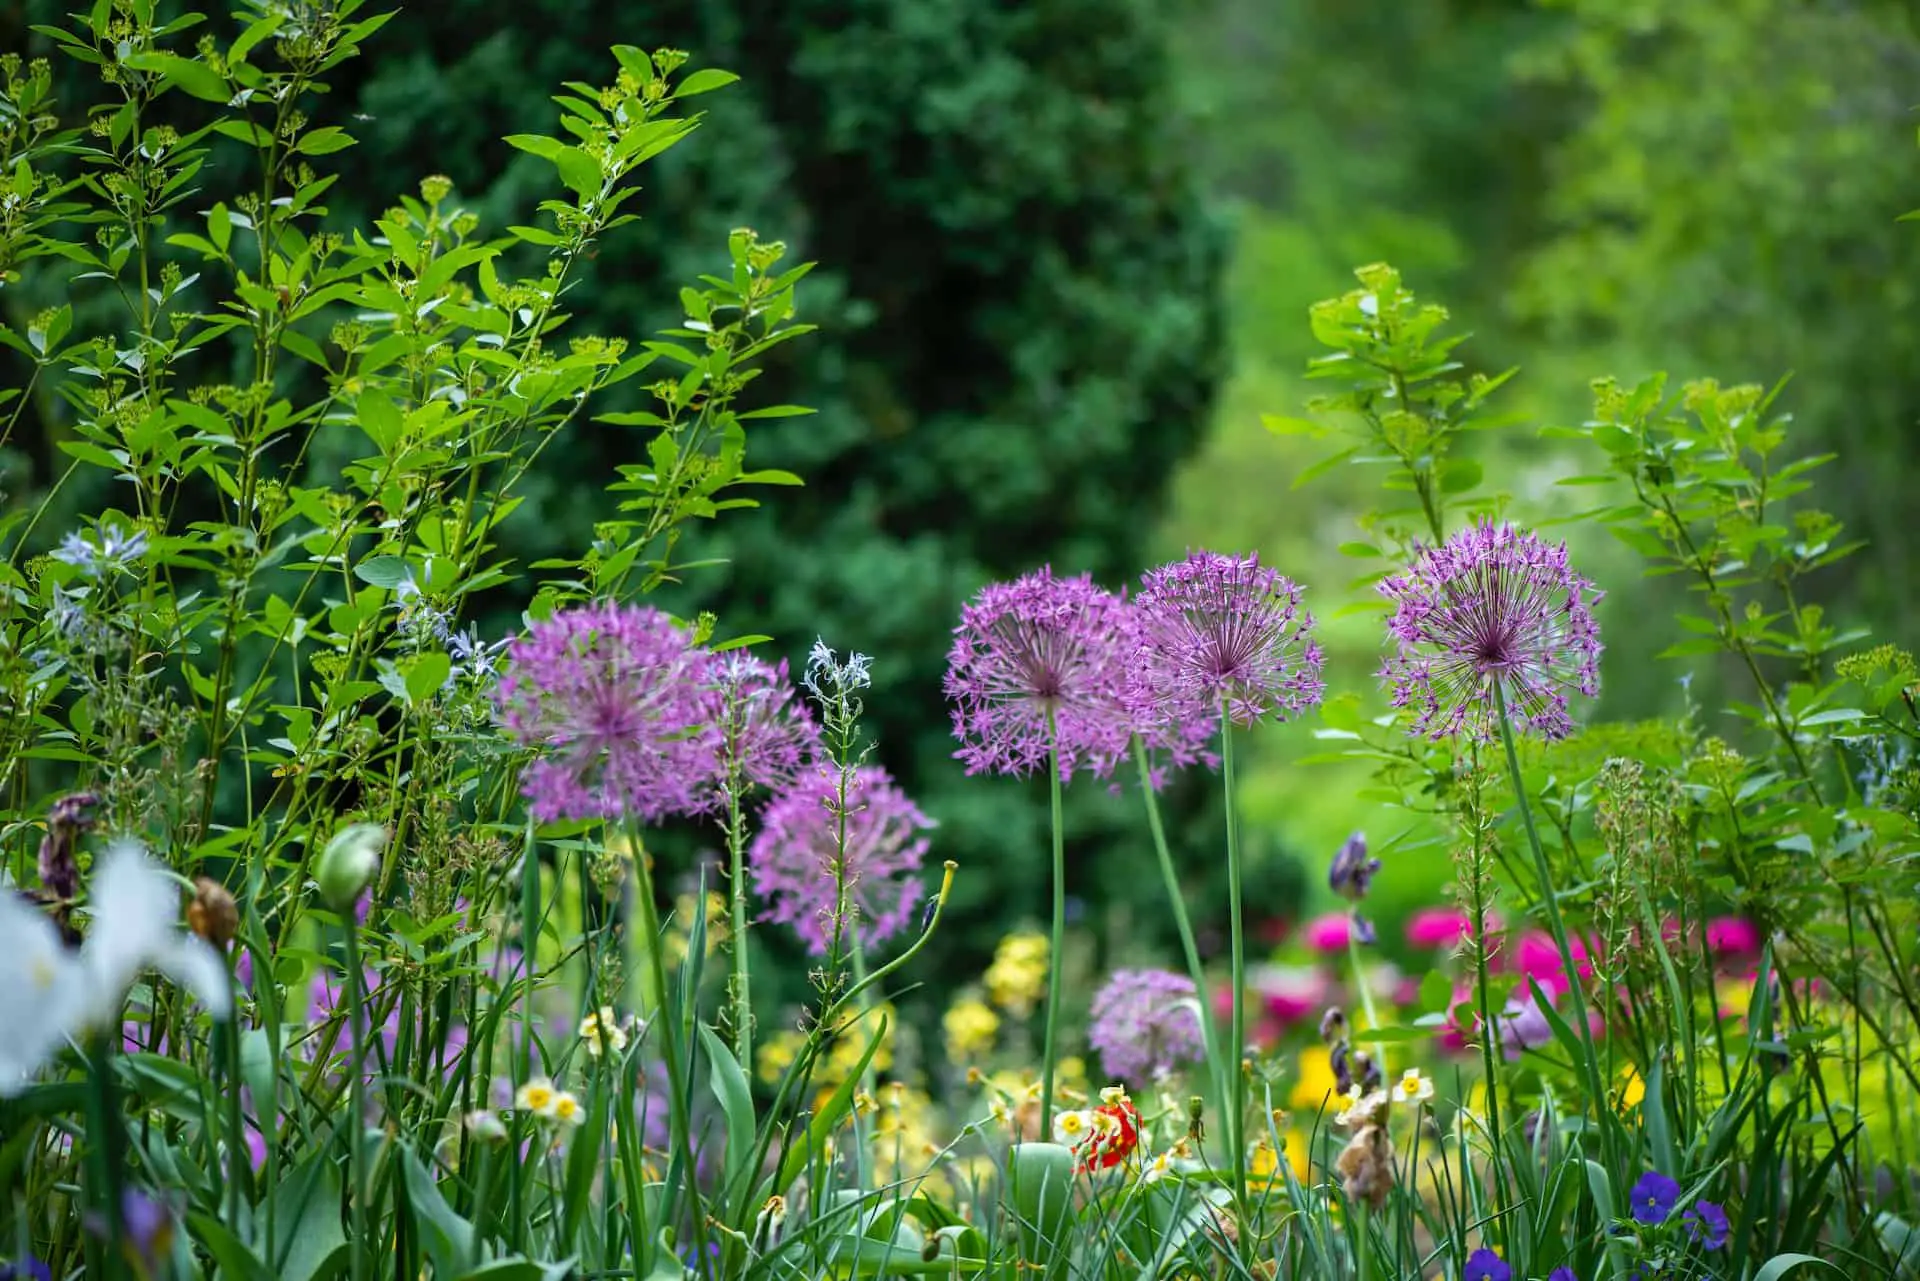 Country flowers in a lush green garden